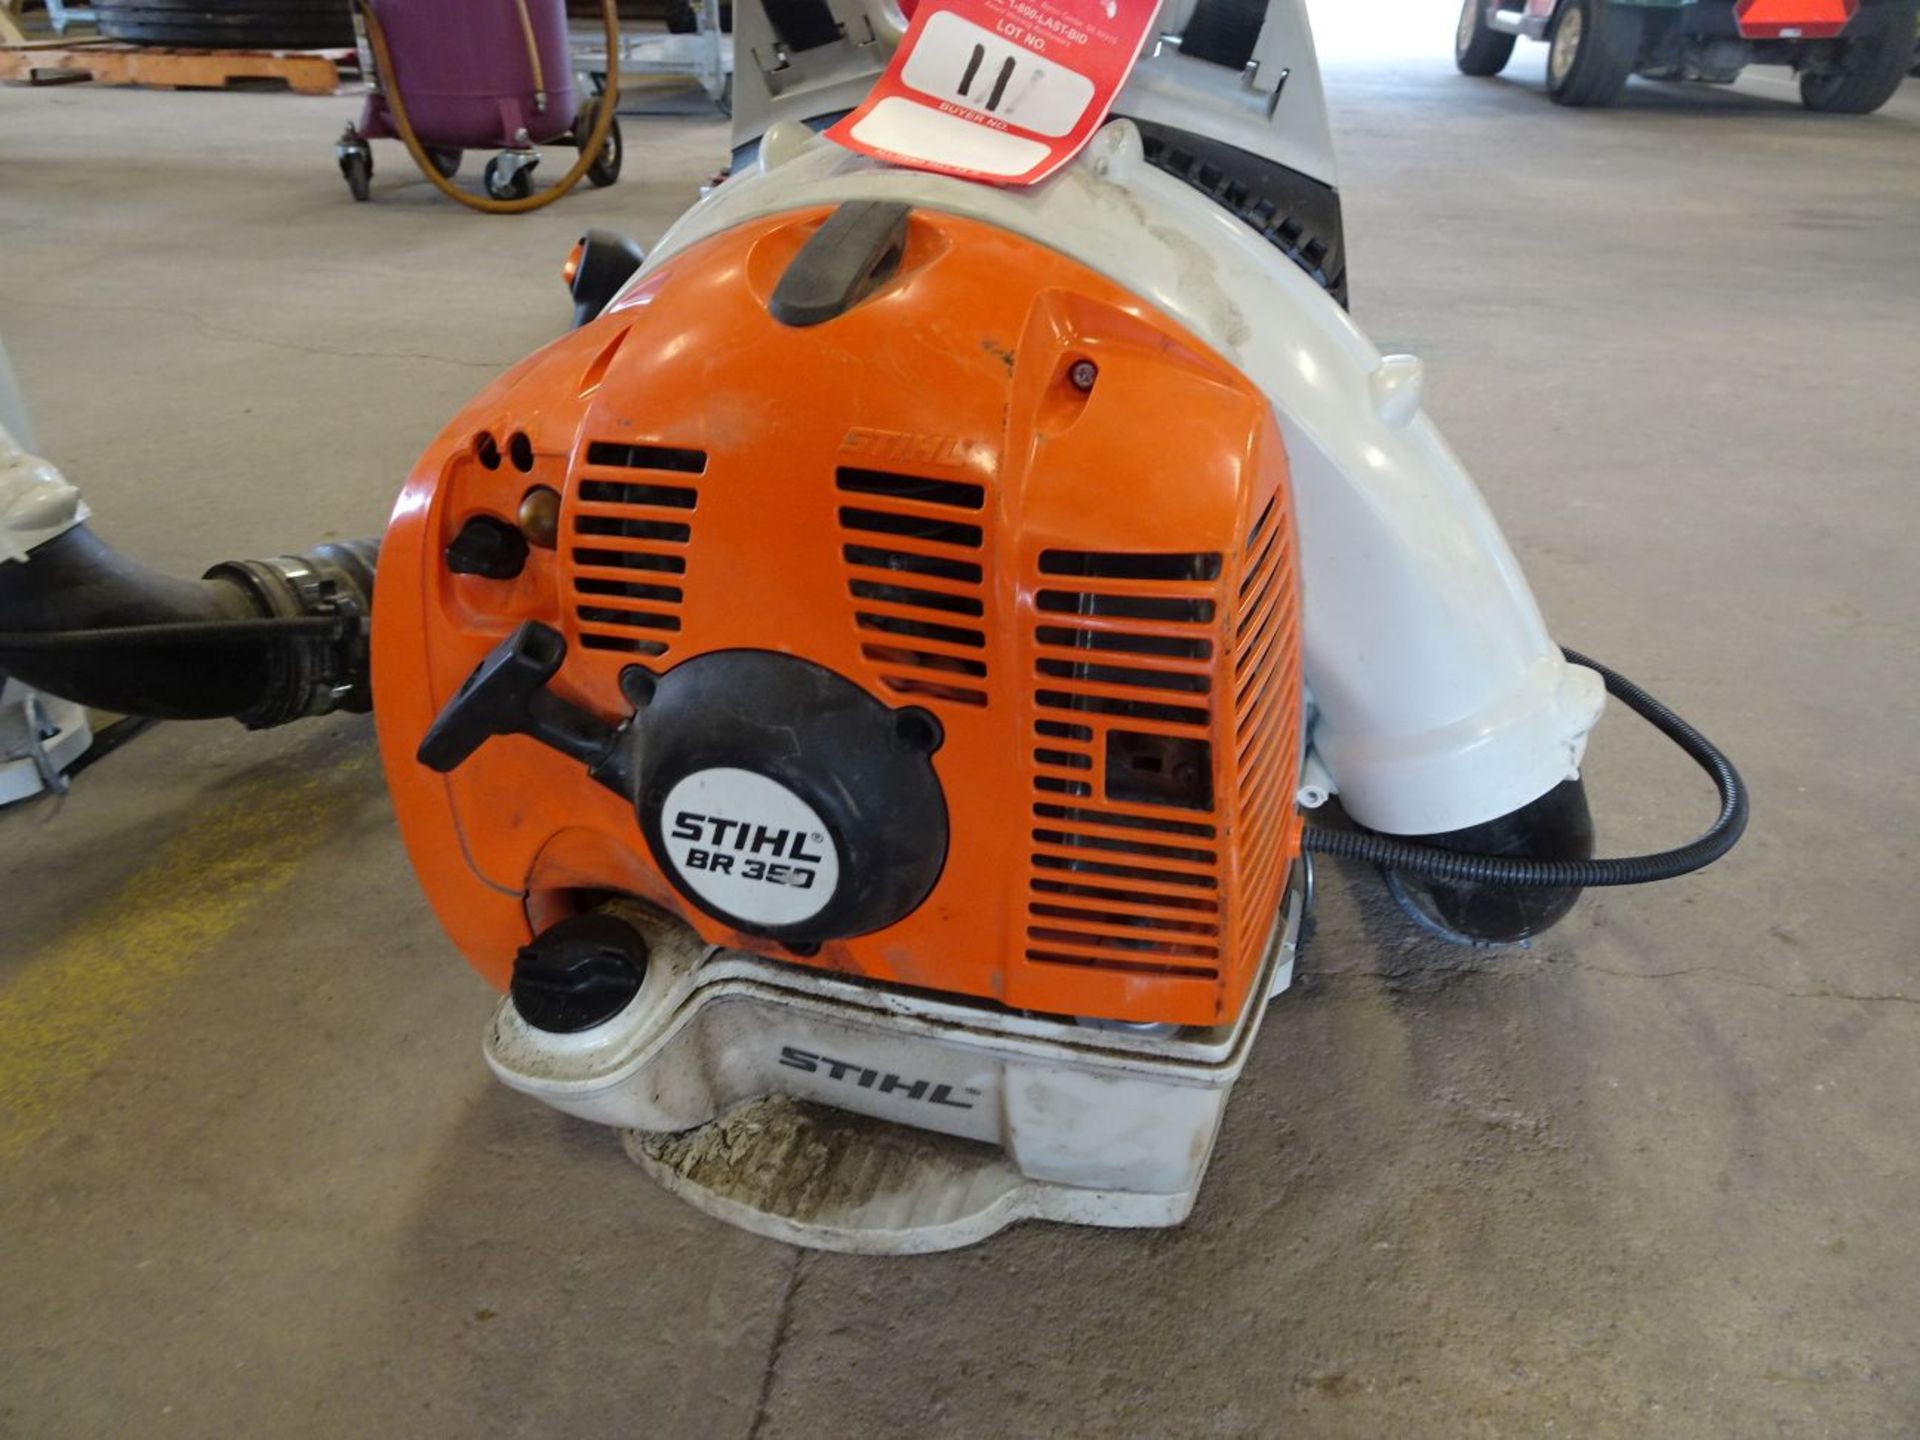 STIHL BR350 GAS POWERED BACKPACK BLOWER (LOCATION: SHOP) - Image 2 of 10